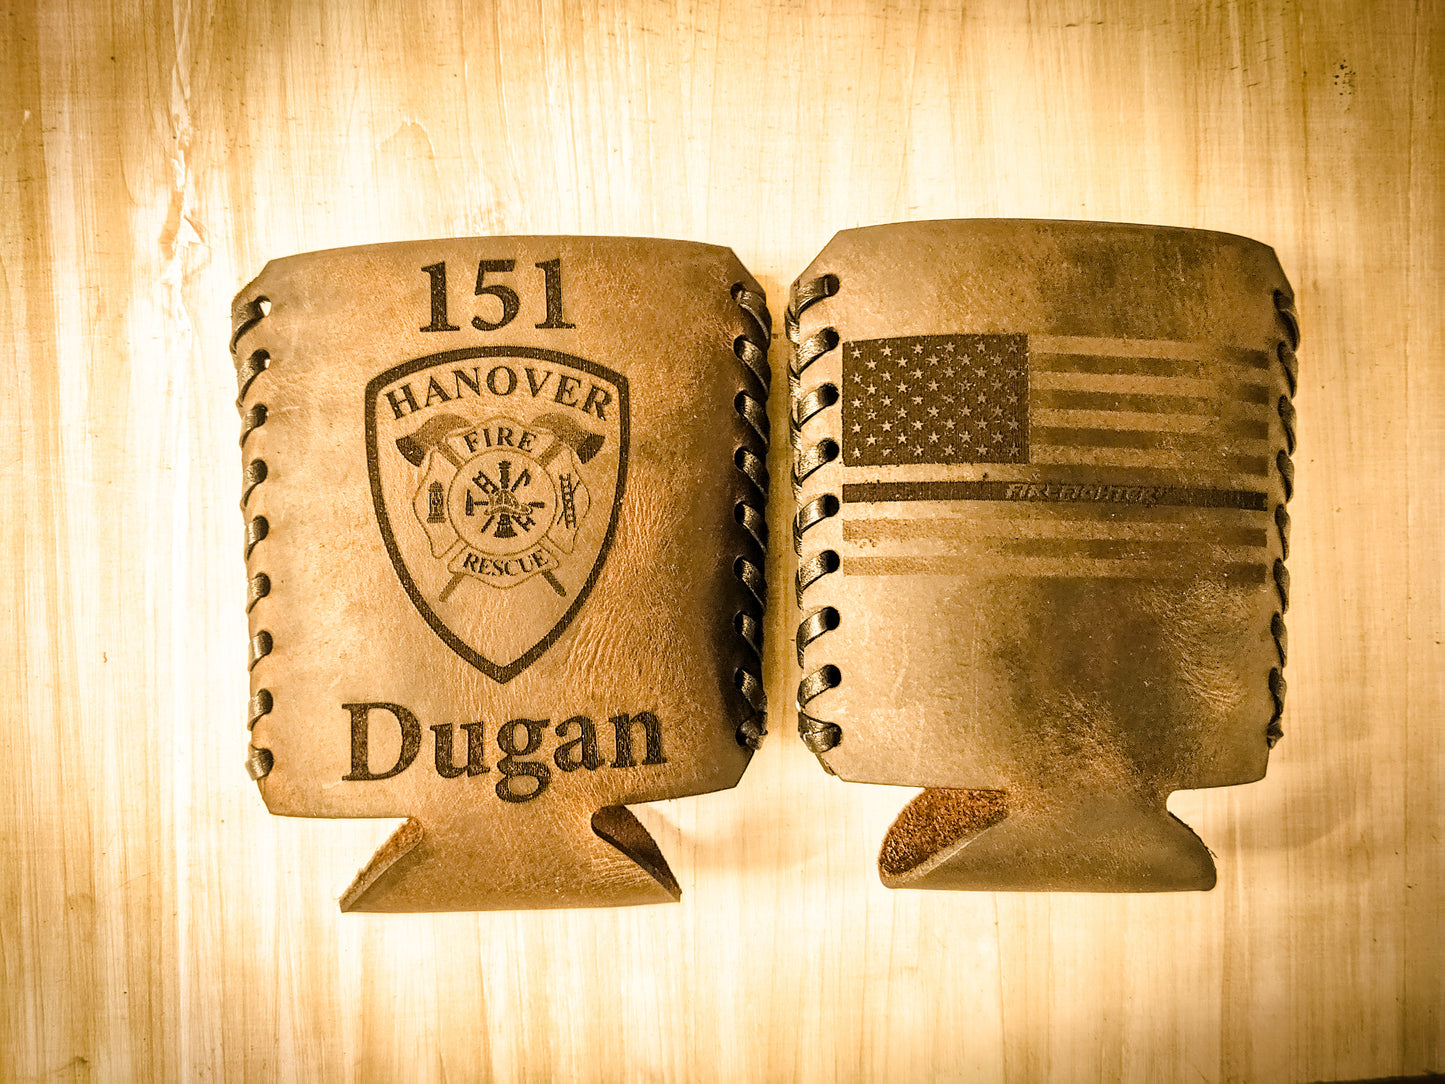 Premium leather drink sleeve personalized and custom fit to any can, bottle or glass